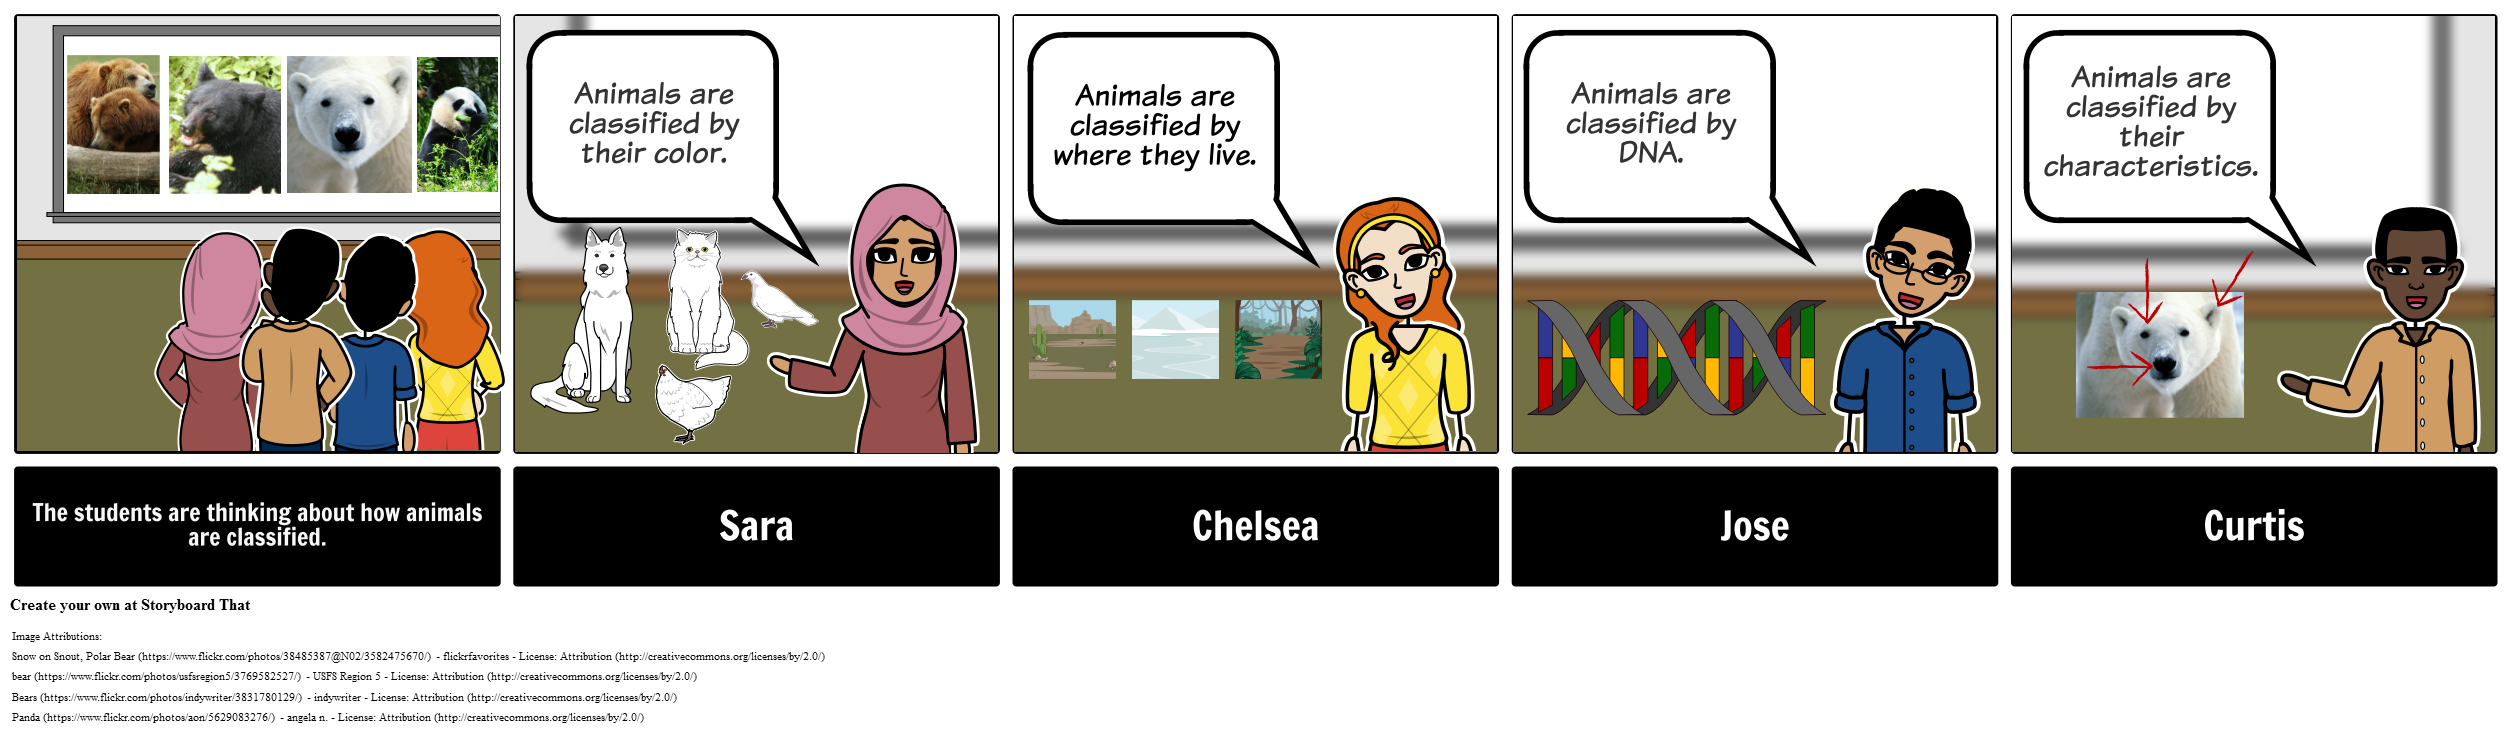 Discussion Storyboard on Animal Classification - MS